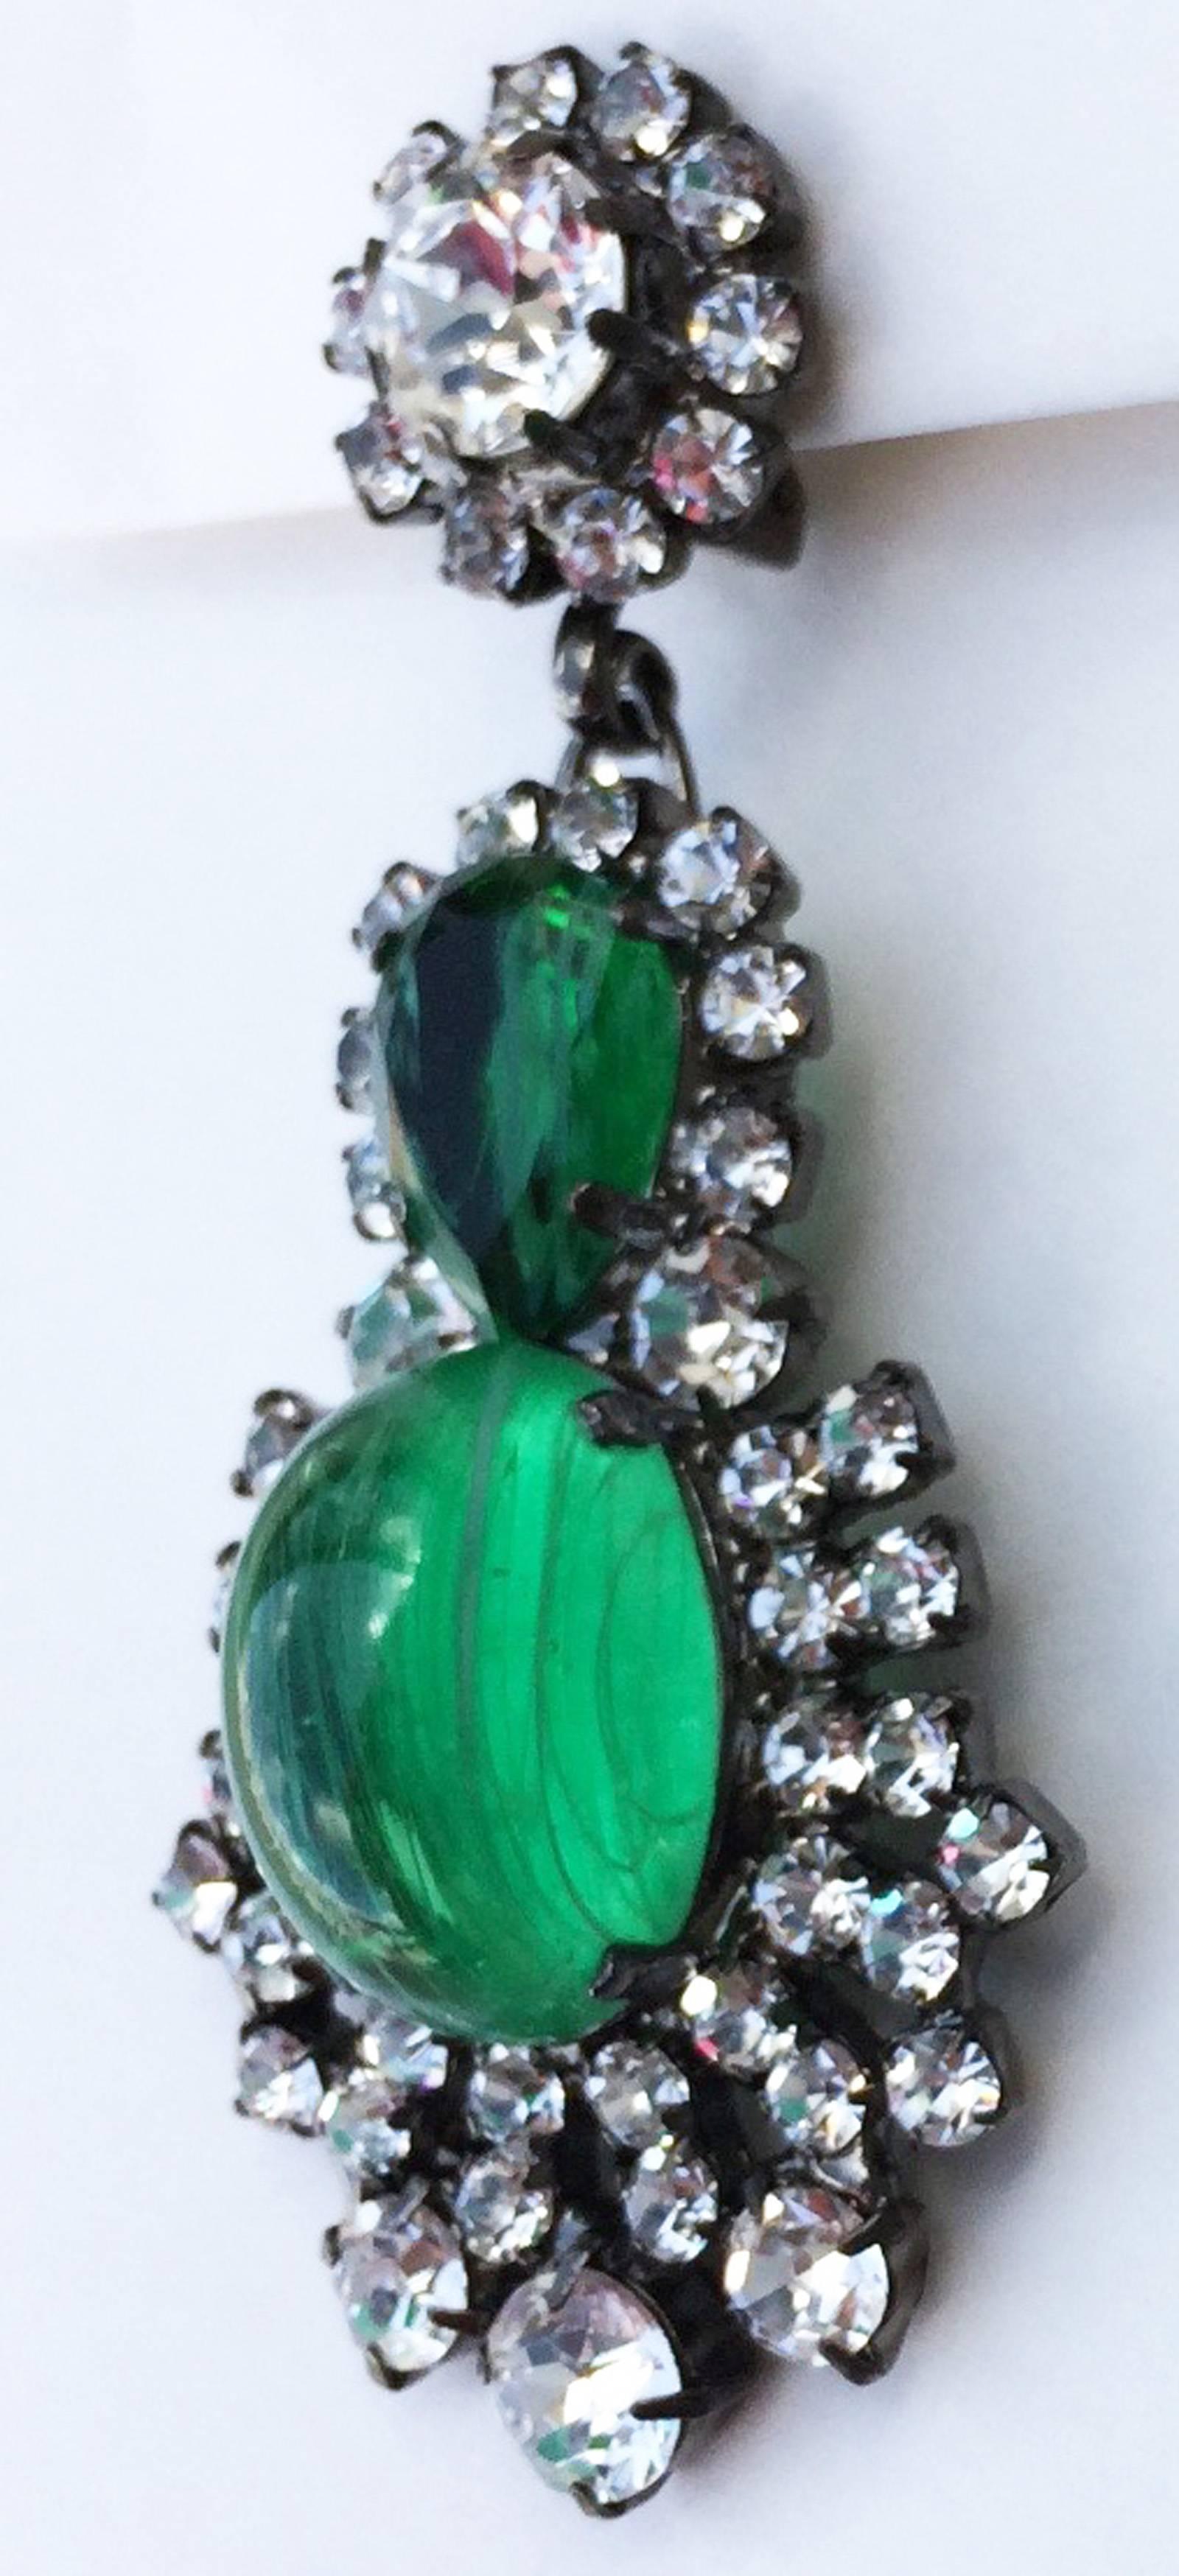 A fine pair Alan Anderson crystal ear drops. Signed japanned metal items feature molded green glass centers, faceted green crystal stones and Swarovski crystals. Clip backs. Pristine unworn.